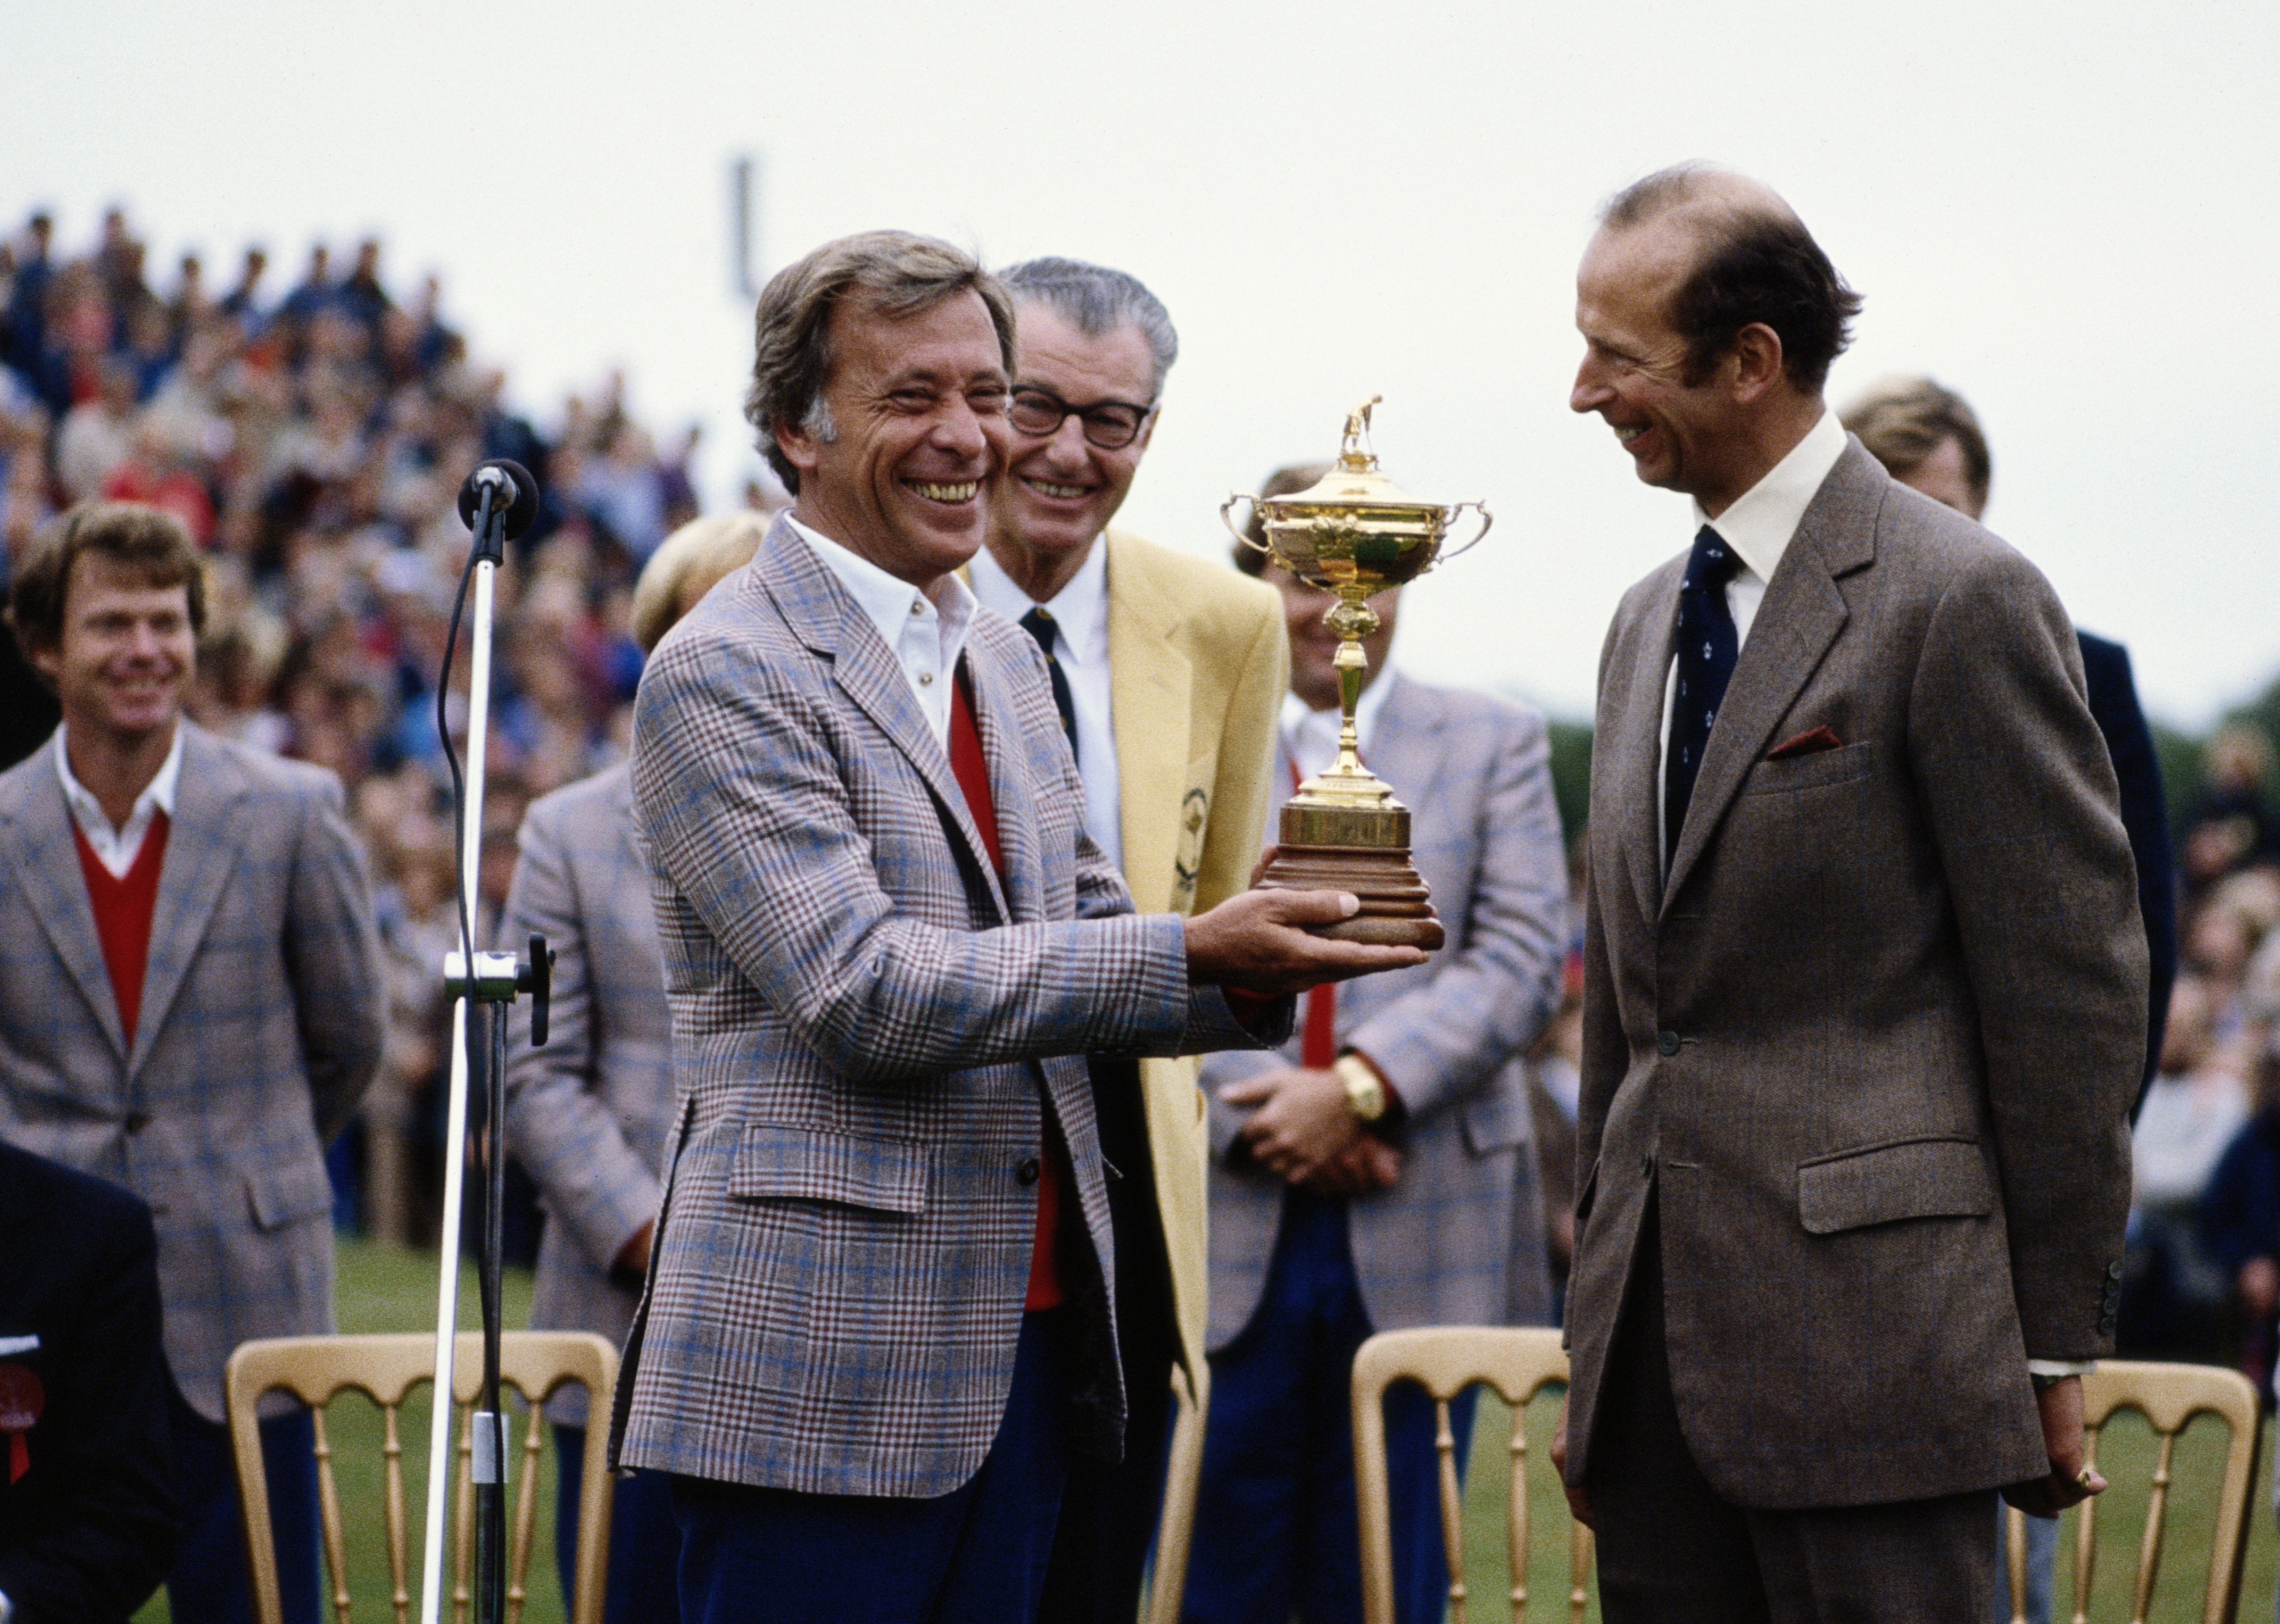 Dave Marr, captain of the United States team recieves the Ryder Cup trophy from HRH Duke of Kent as Tom Watson (l) looks on in the background during the  24th Ryder Cup Matches on 27 September 1981 at Walton Heath Golf Club in Walton-on-the-Hill, Surrey,